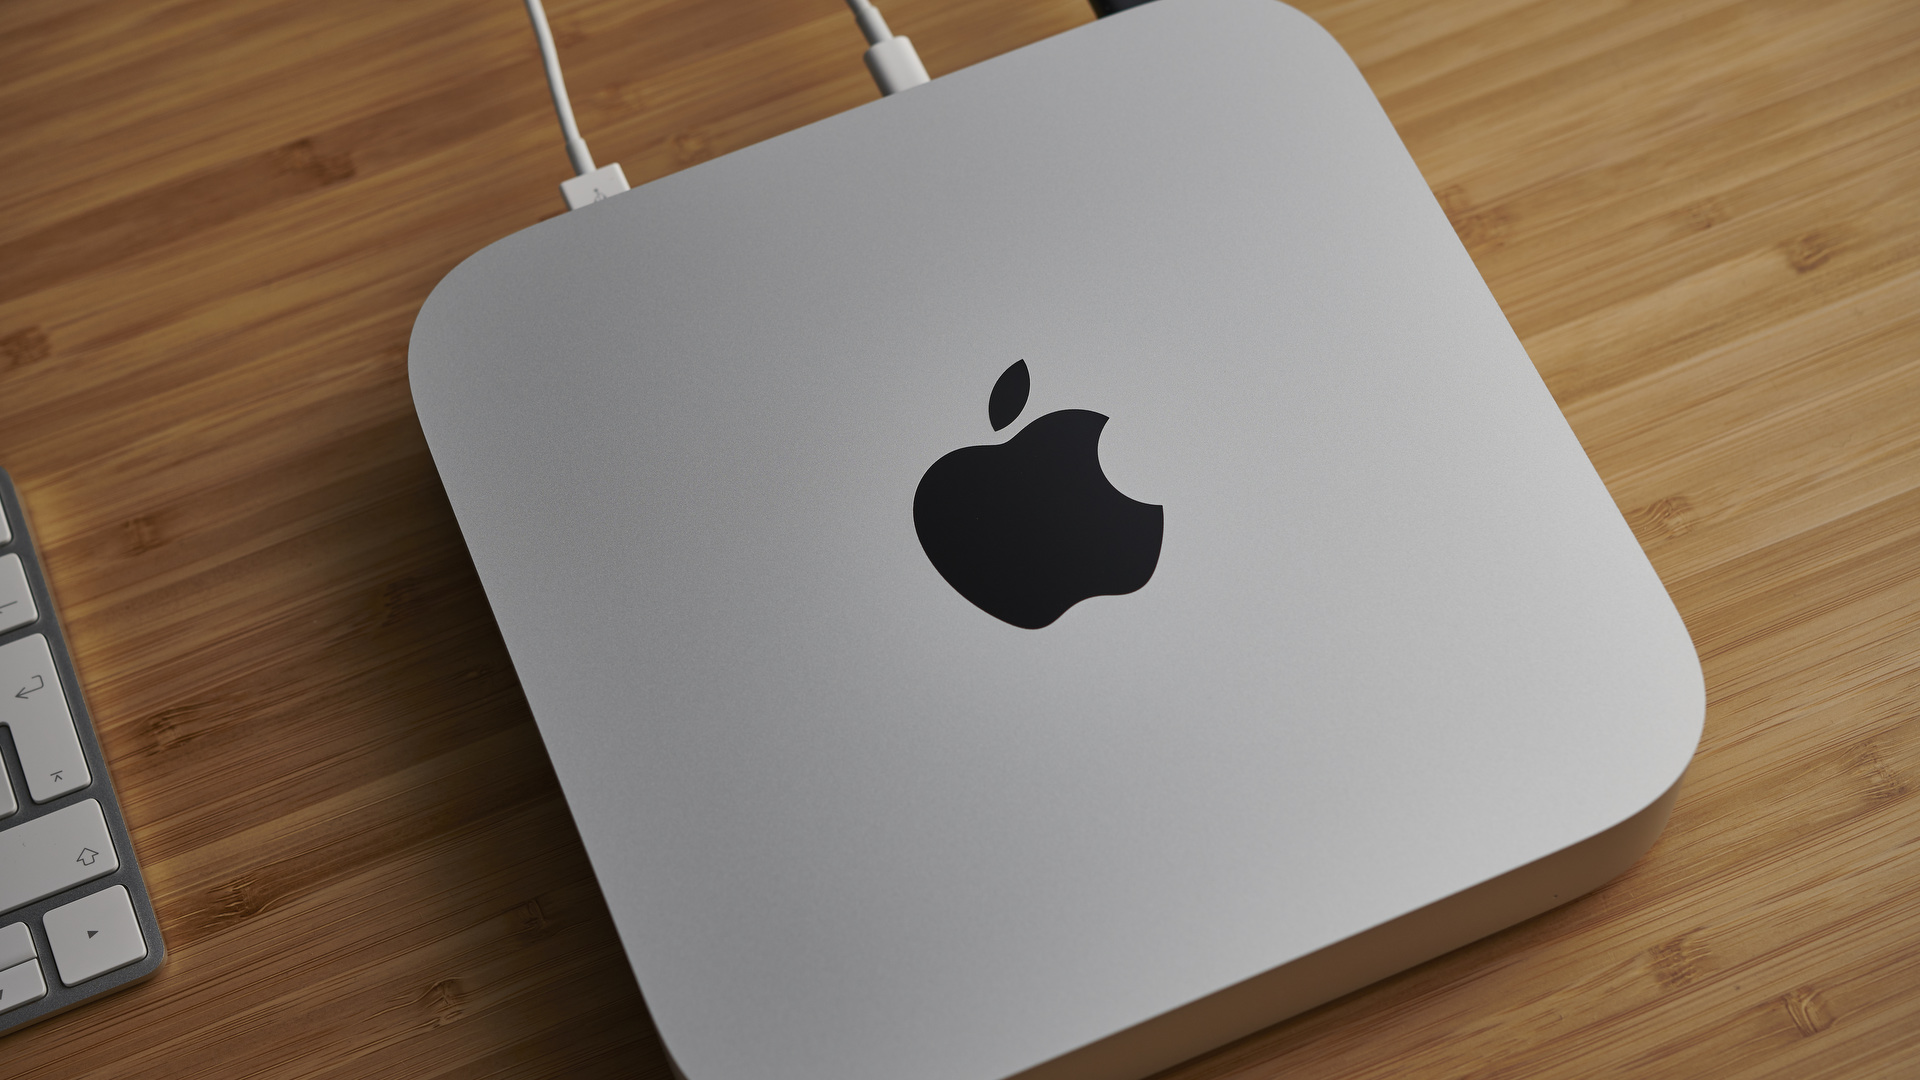 Mac mini (M1, 2020) is reportedly having problems with Bluetooth 